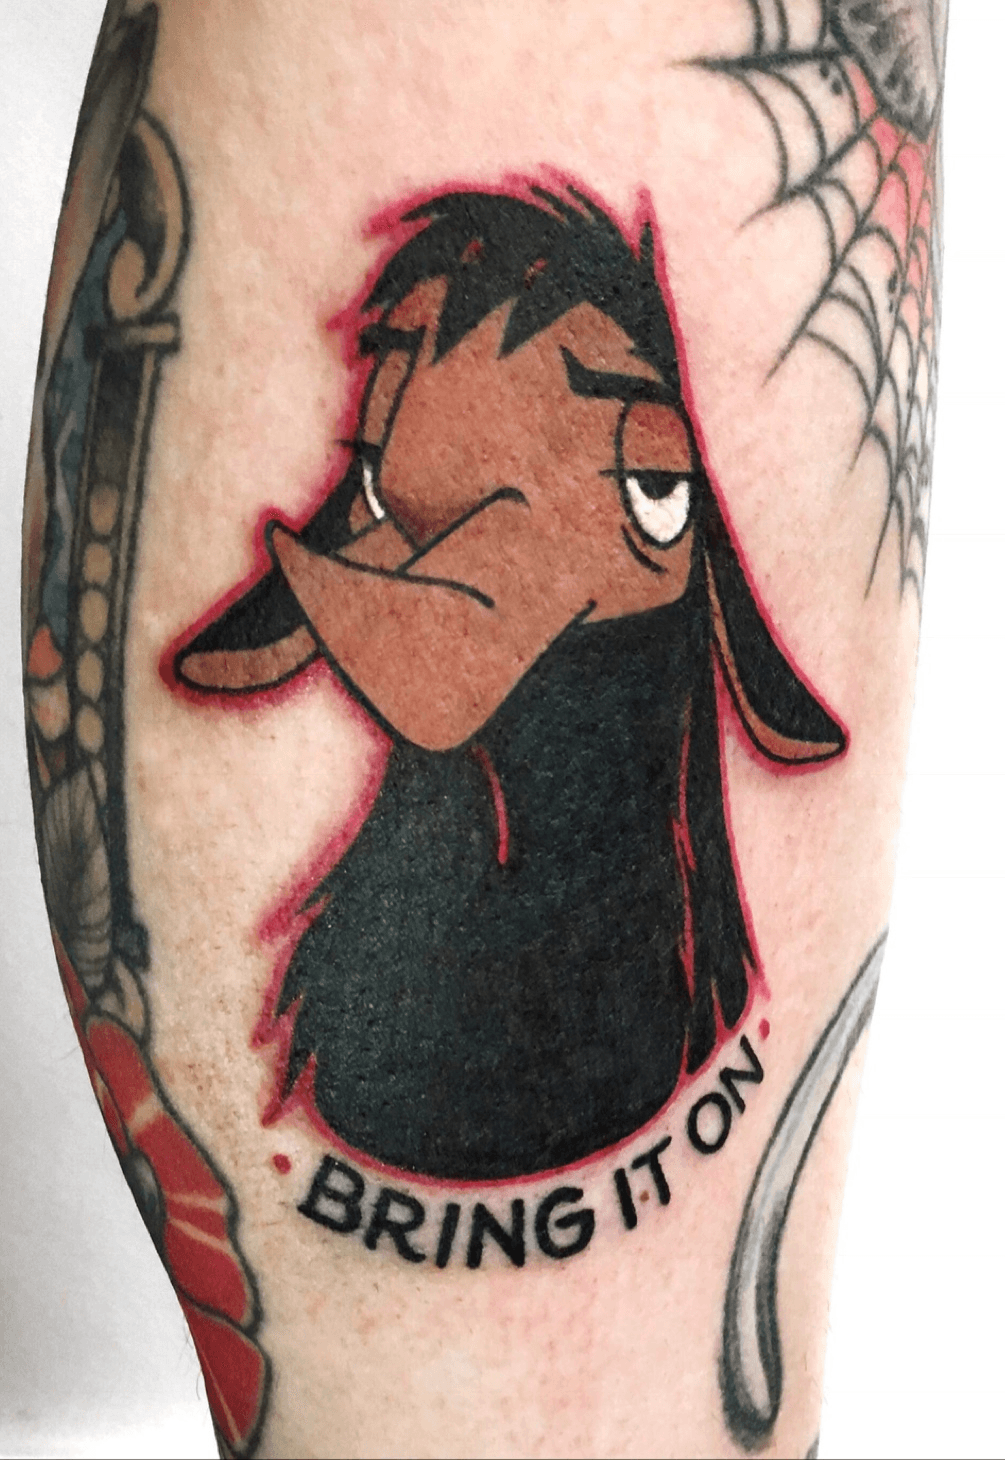 Emperors new groove tattoo